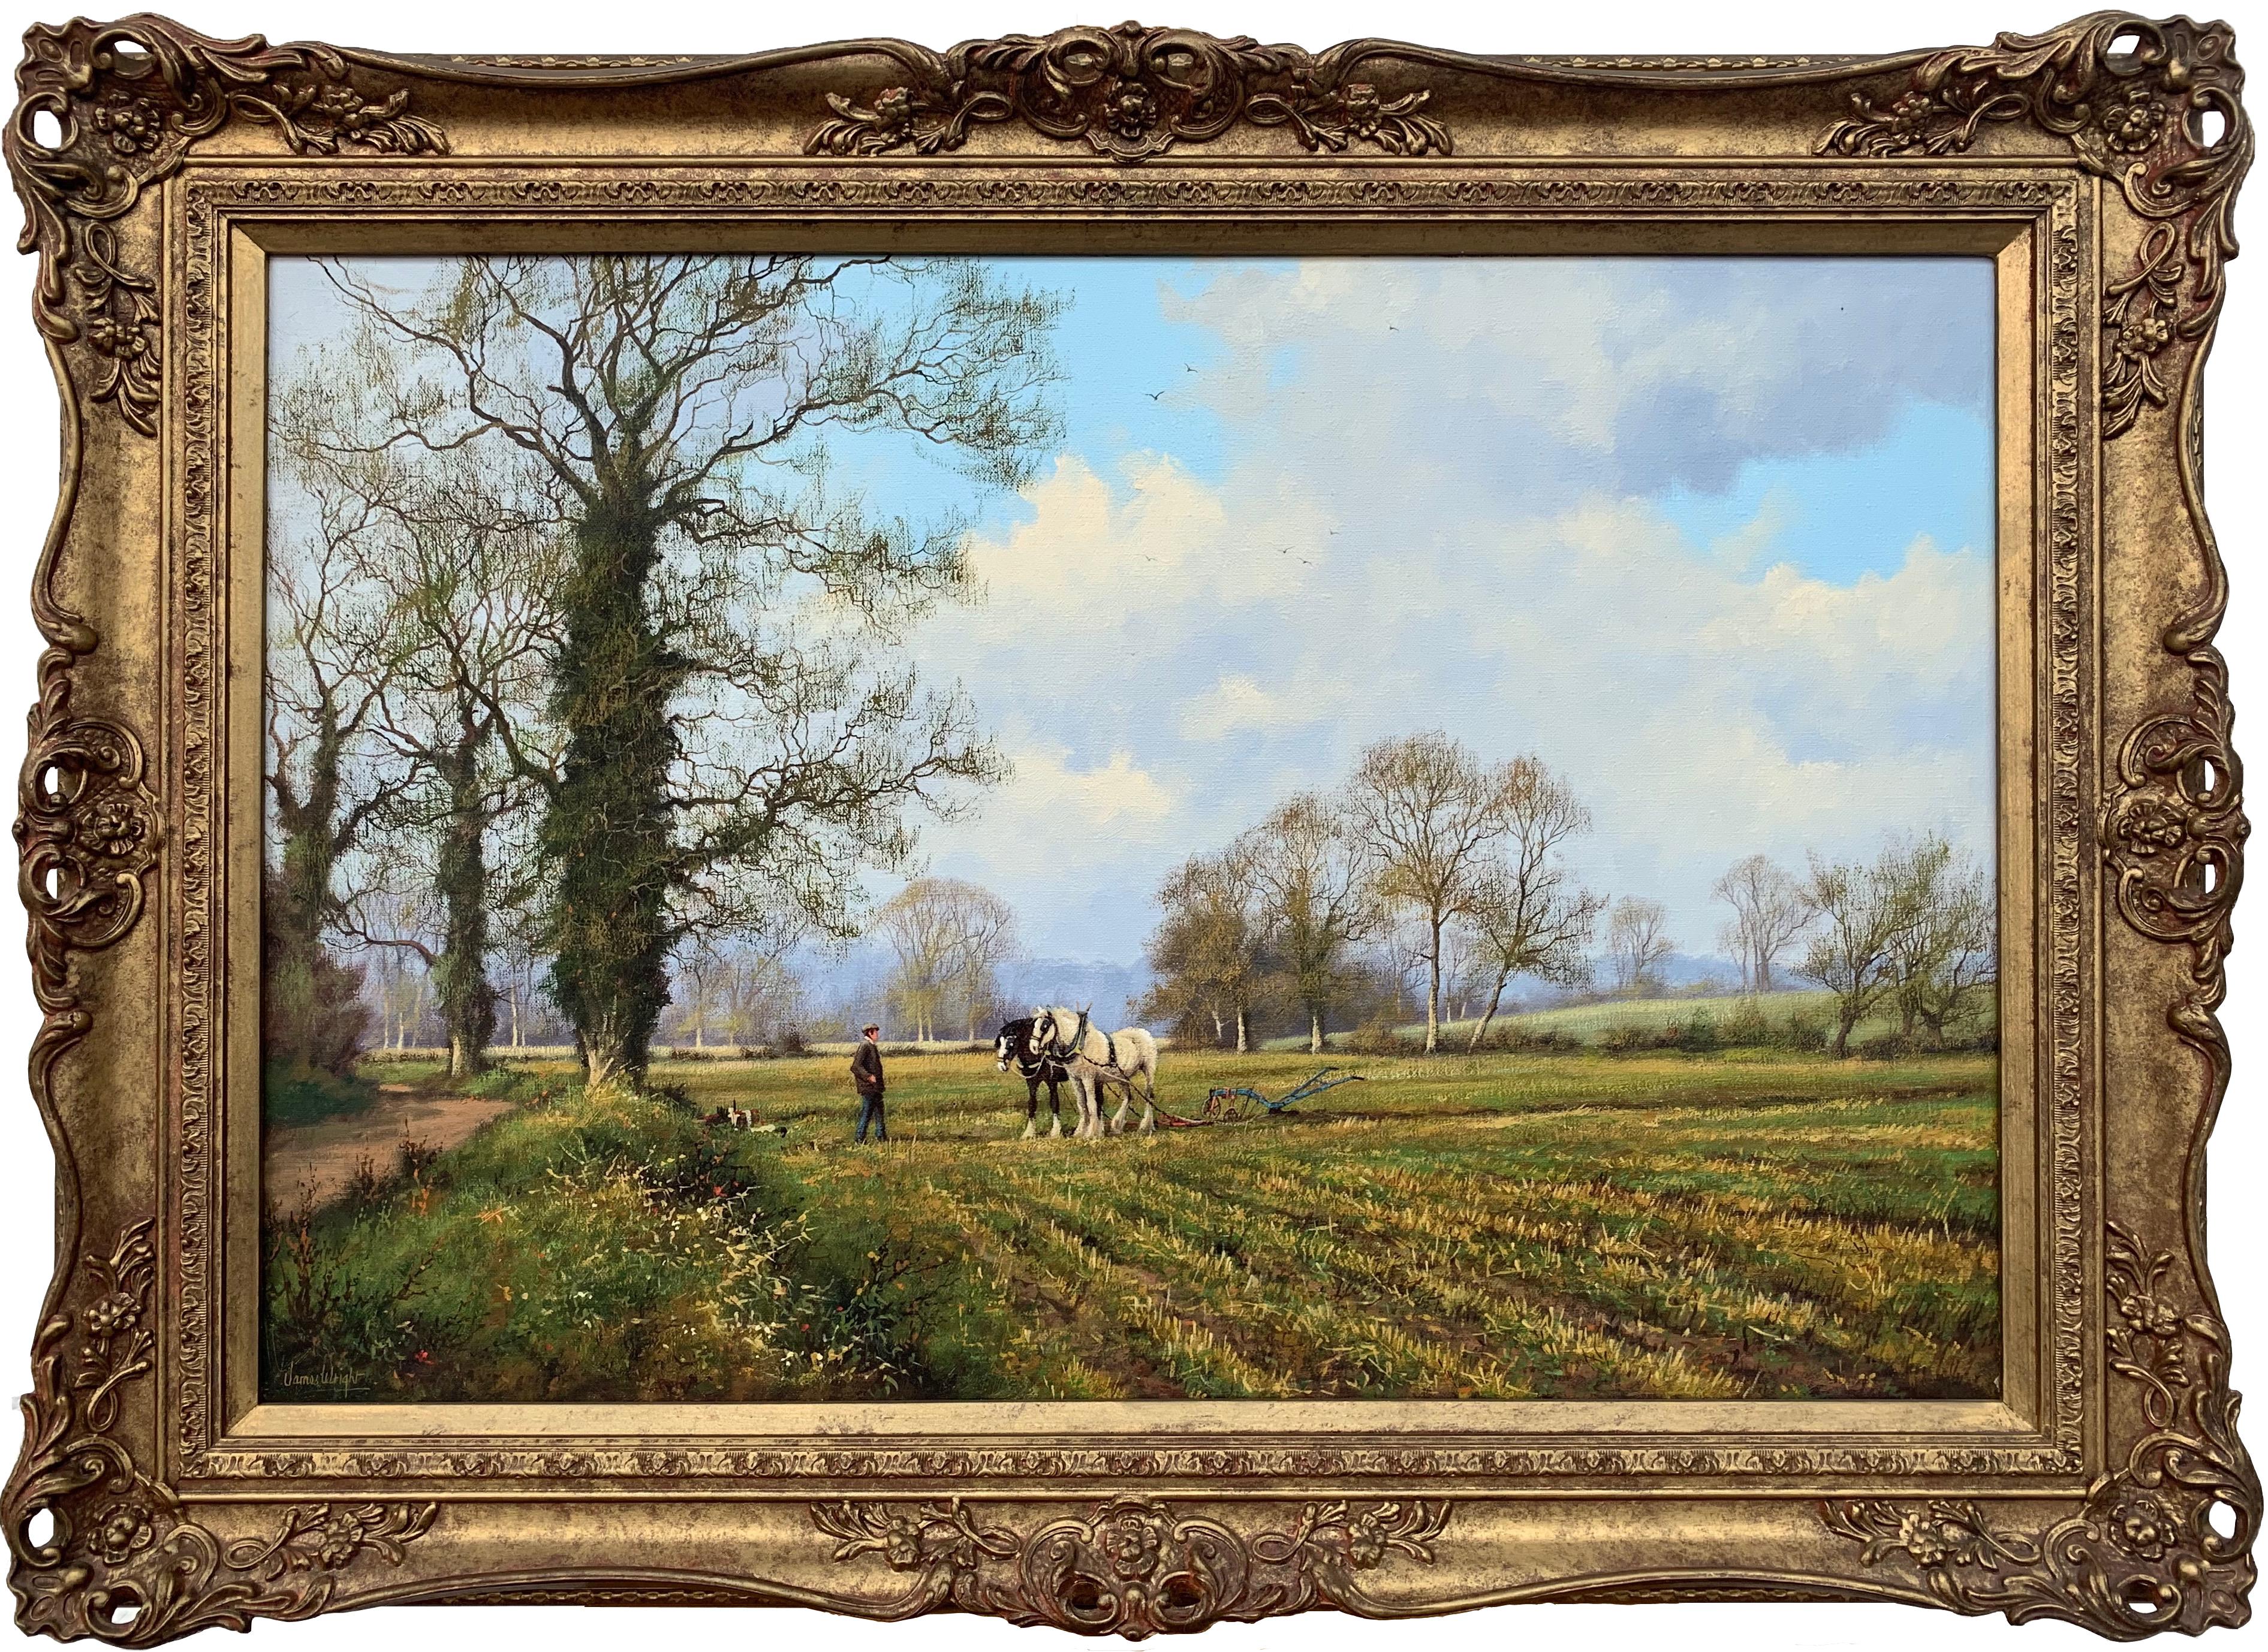 James Wright Animal Painting - Oil Painting of the English Countryside with Horses by Modern British Artist